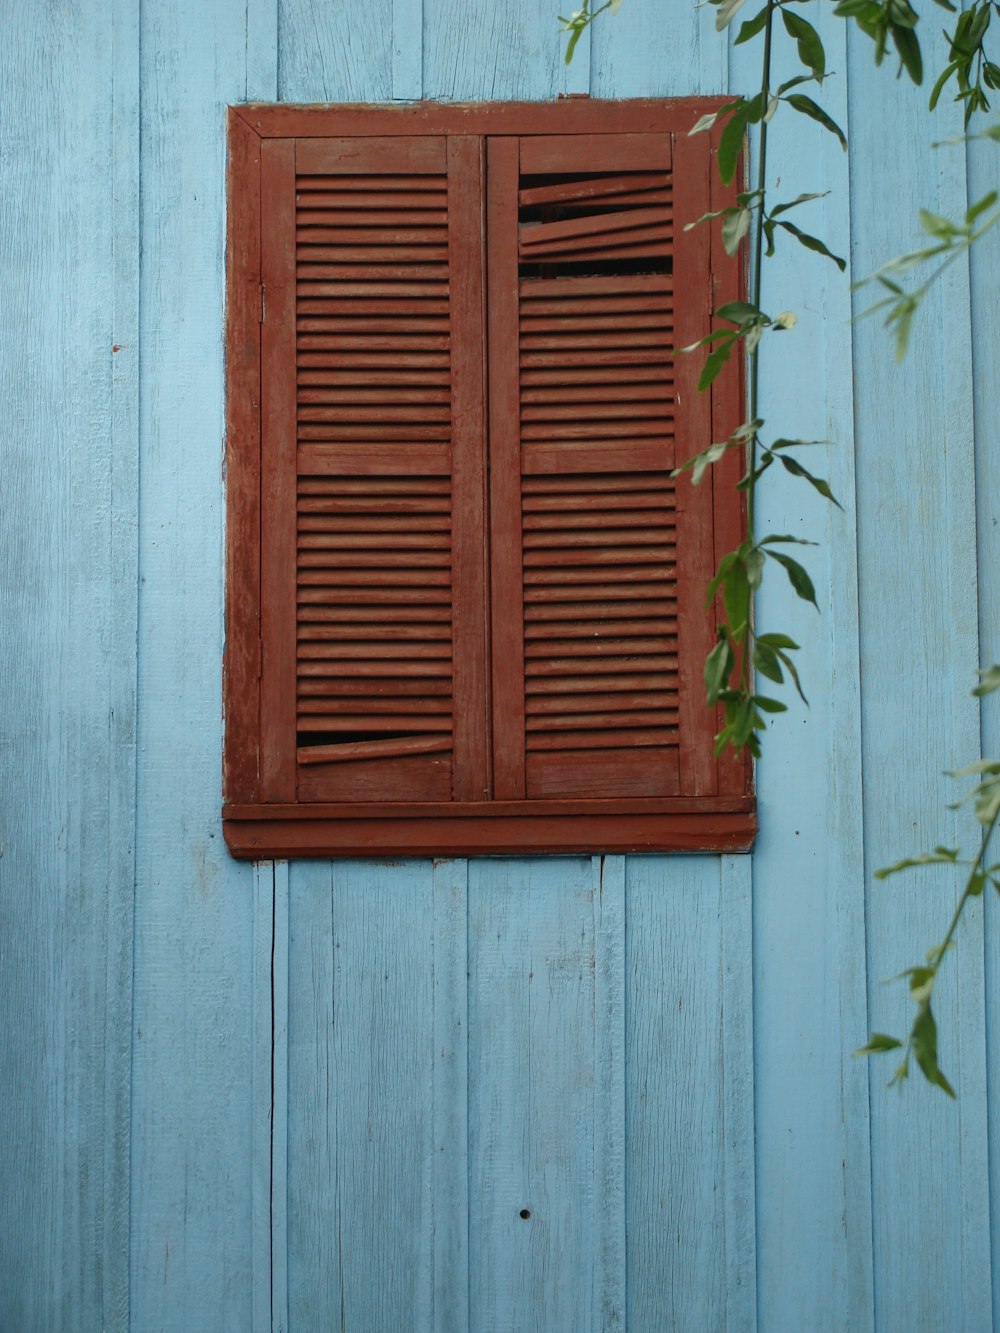 brown wooden window on blue painted wall